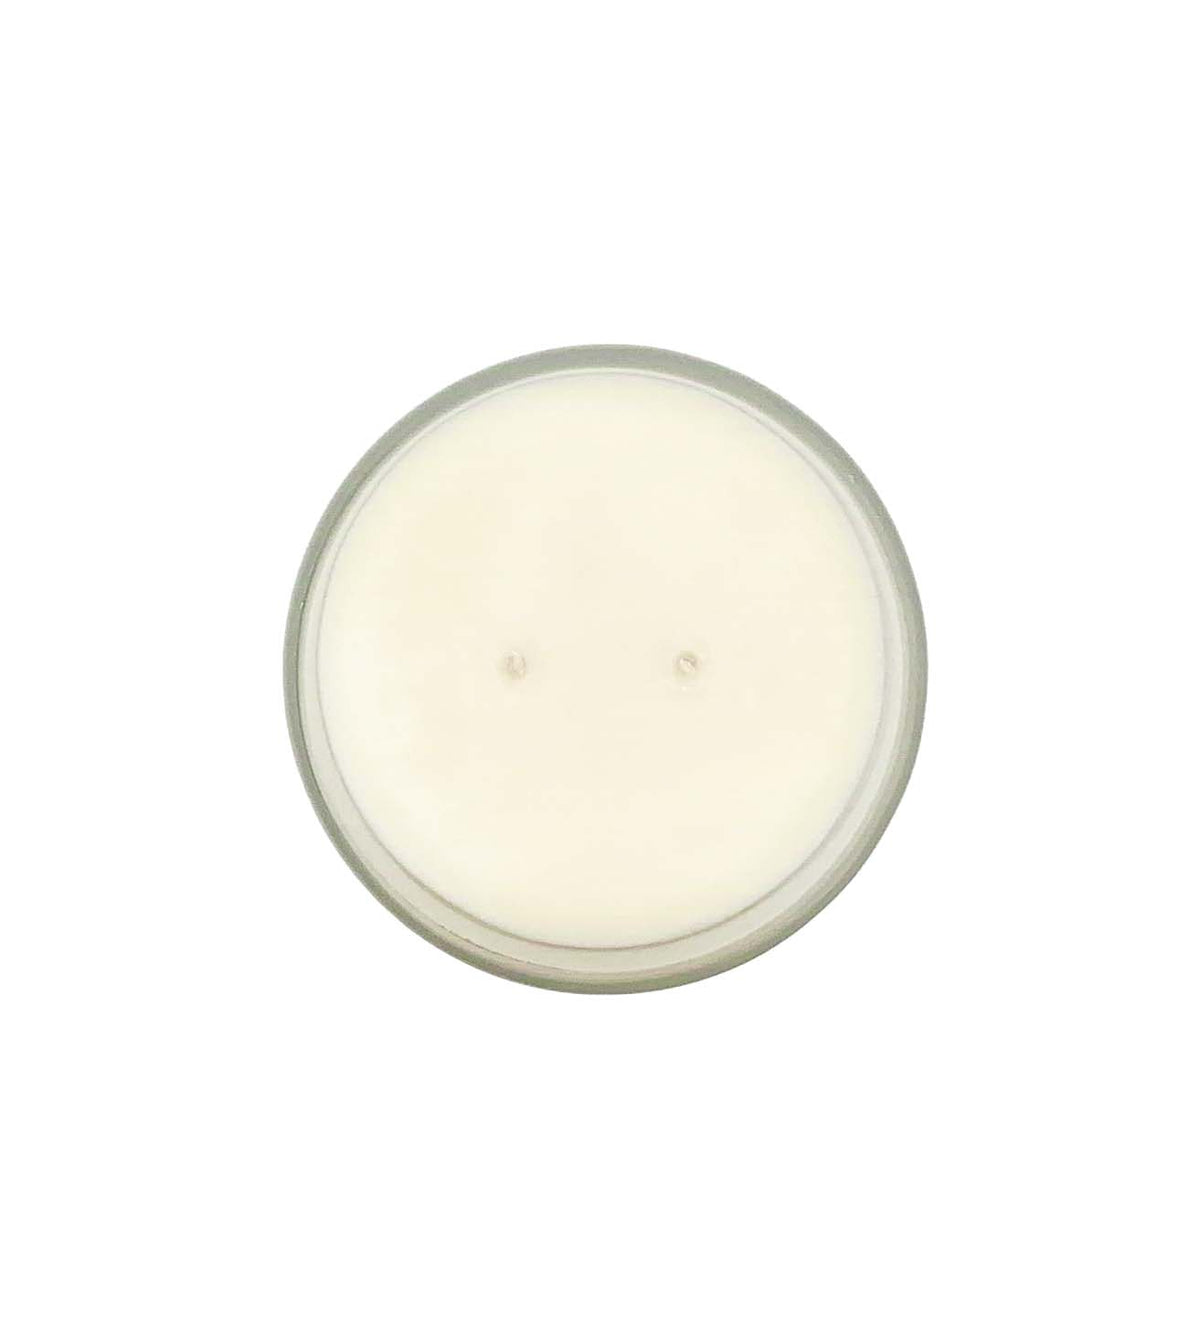 MONTECITO LARGE CANDLE